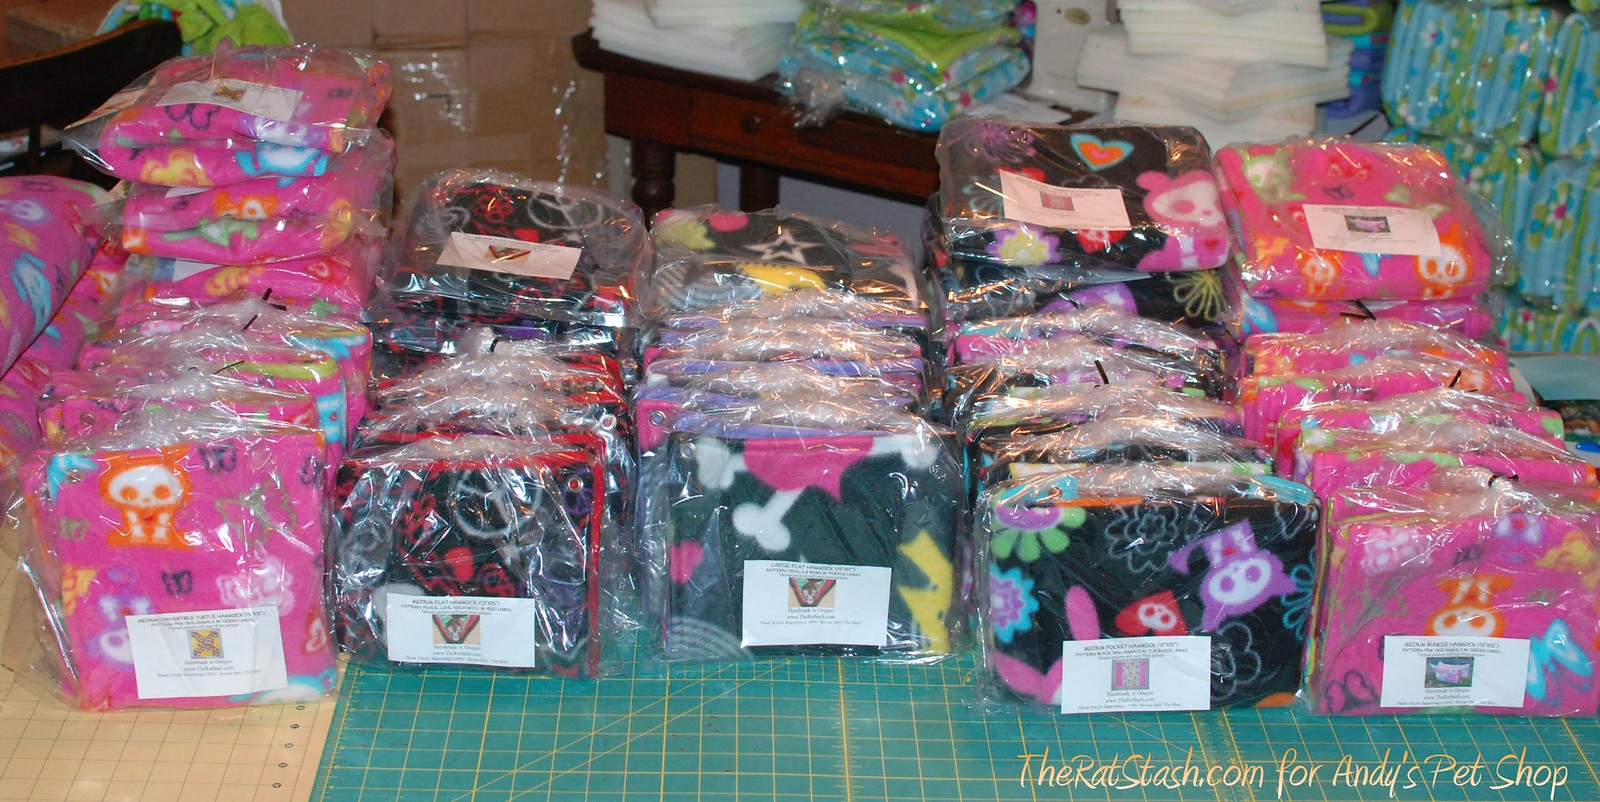 My first wholesale order for Andy's Pet Shop. Heading to my hometown of San Jose, CA, of all places.